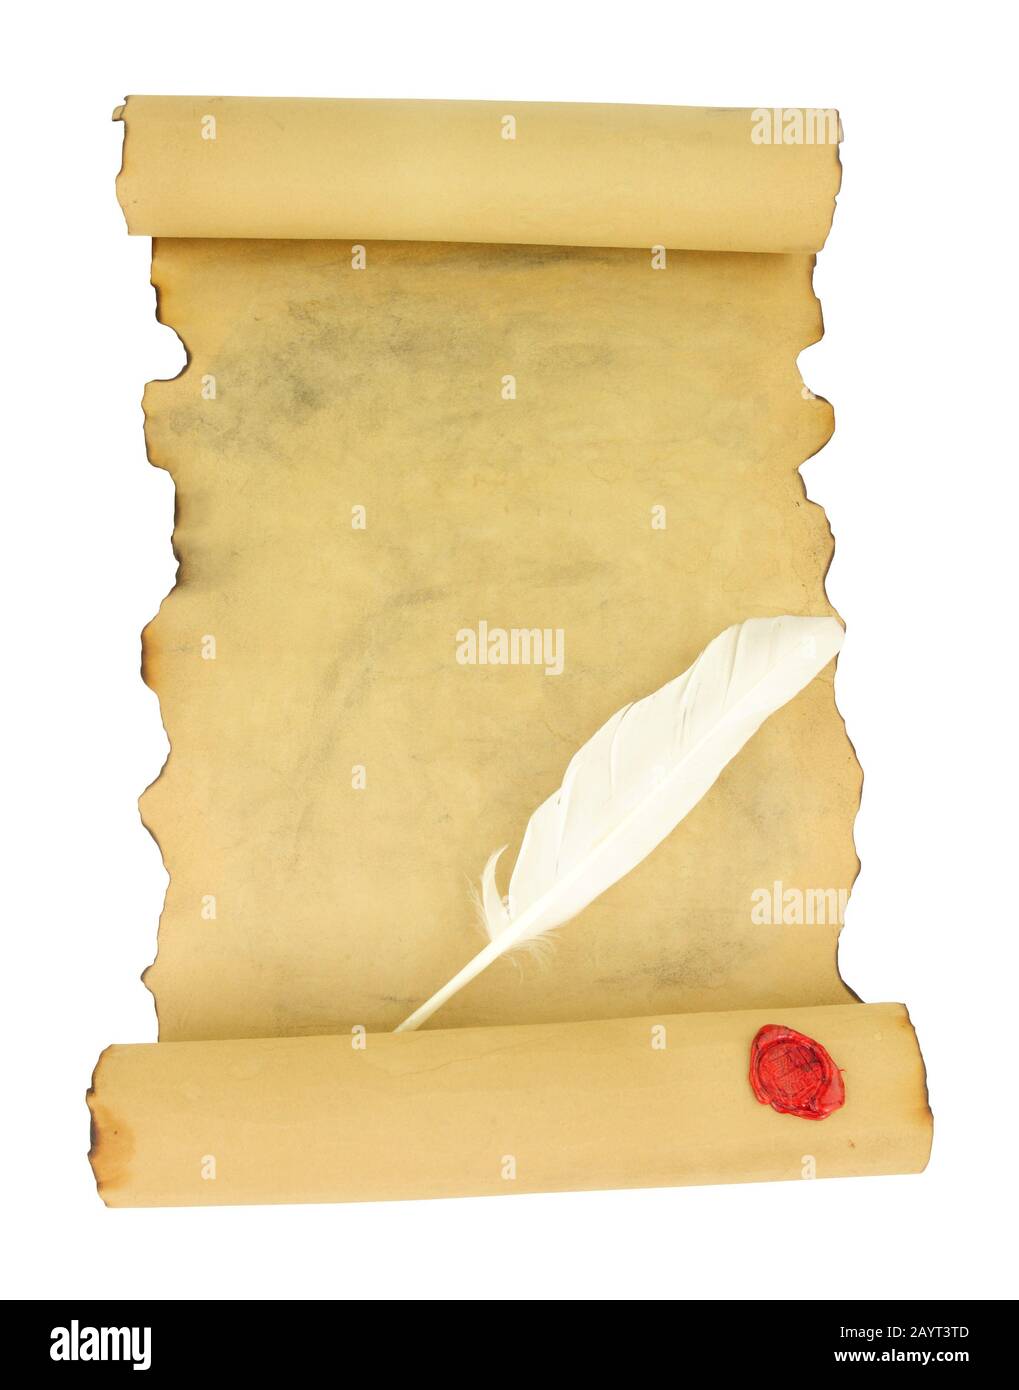 Old vintage paper scroll with red wax seal and feather quill pen isolated  on a white background Stock Photo - Alamy